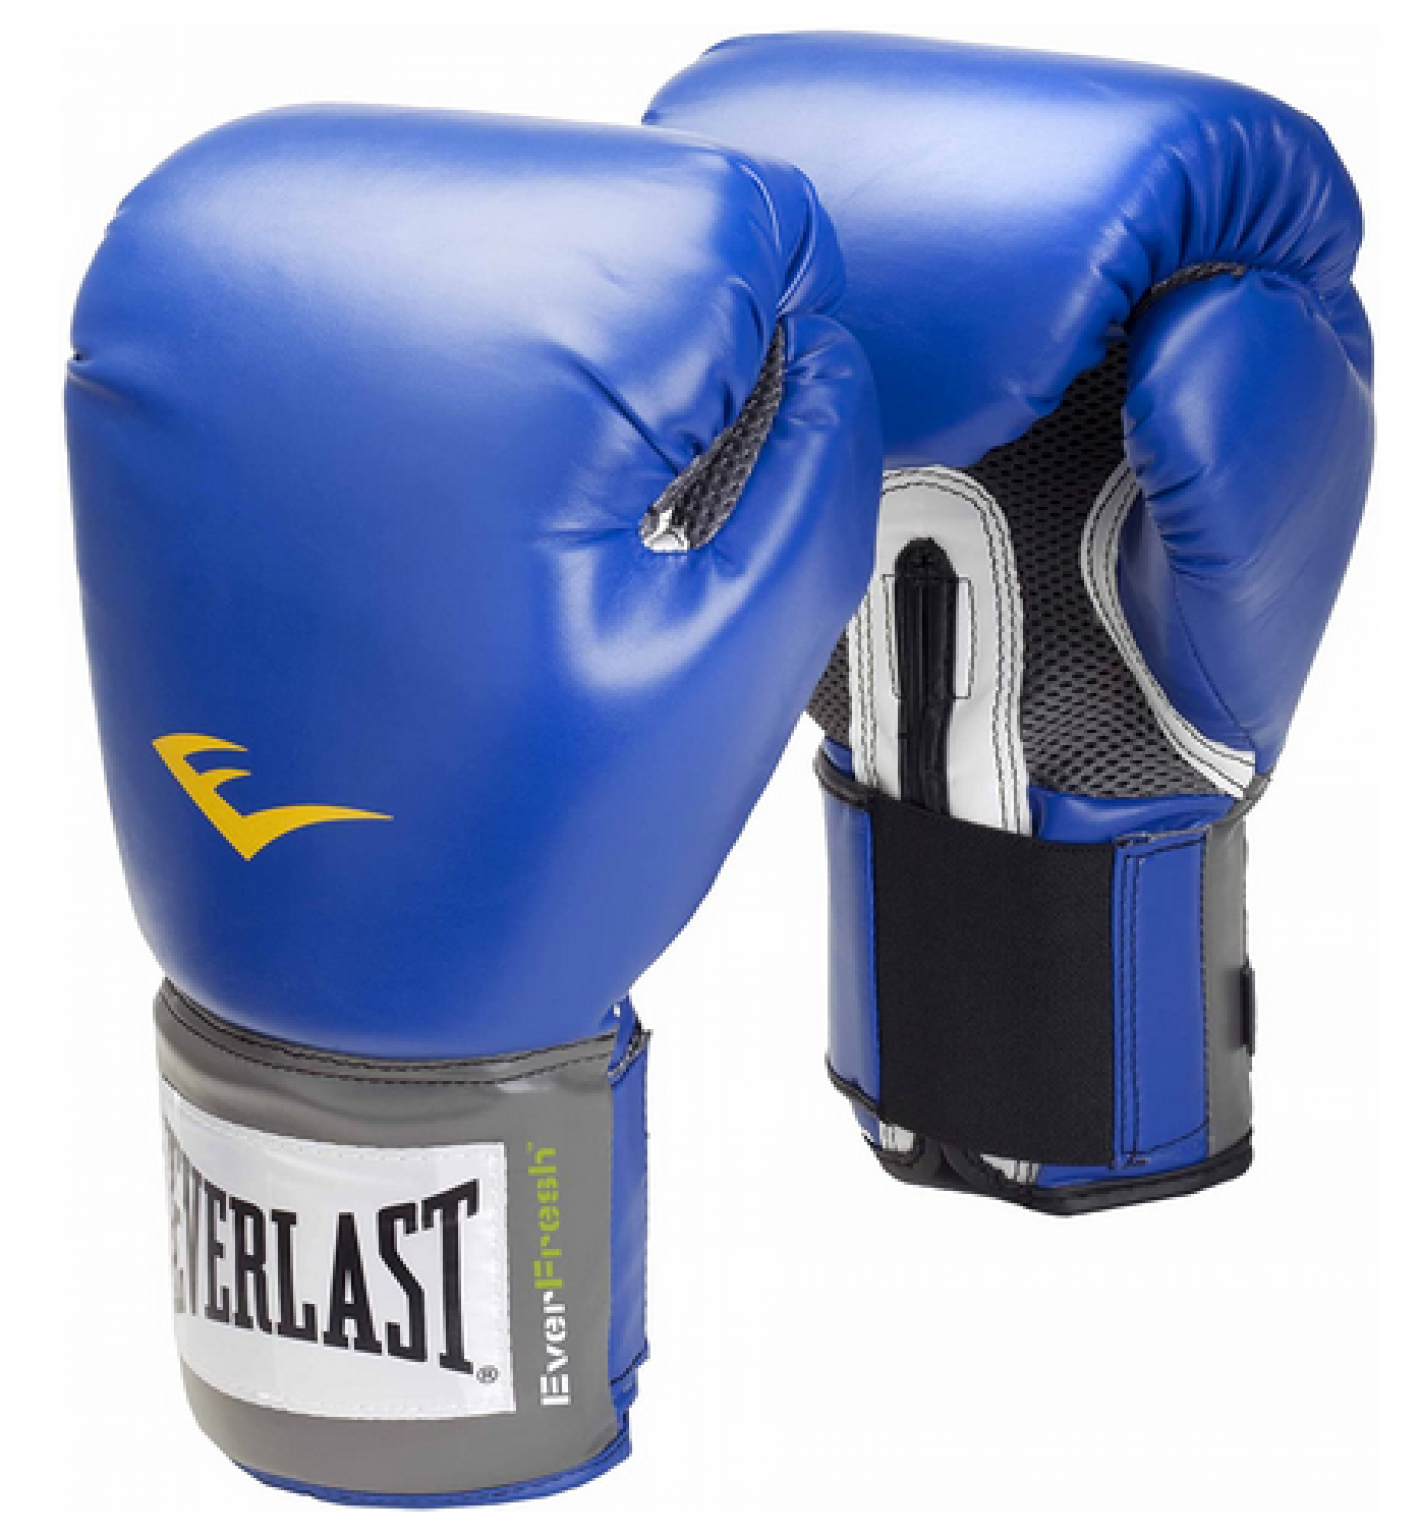 Best Boxing Gloves For Heavy Bag Work 2023 - Reviews & Buyers Guide